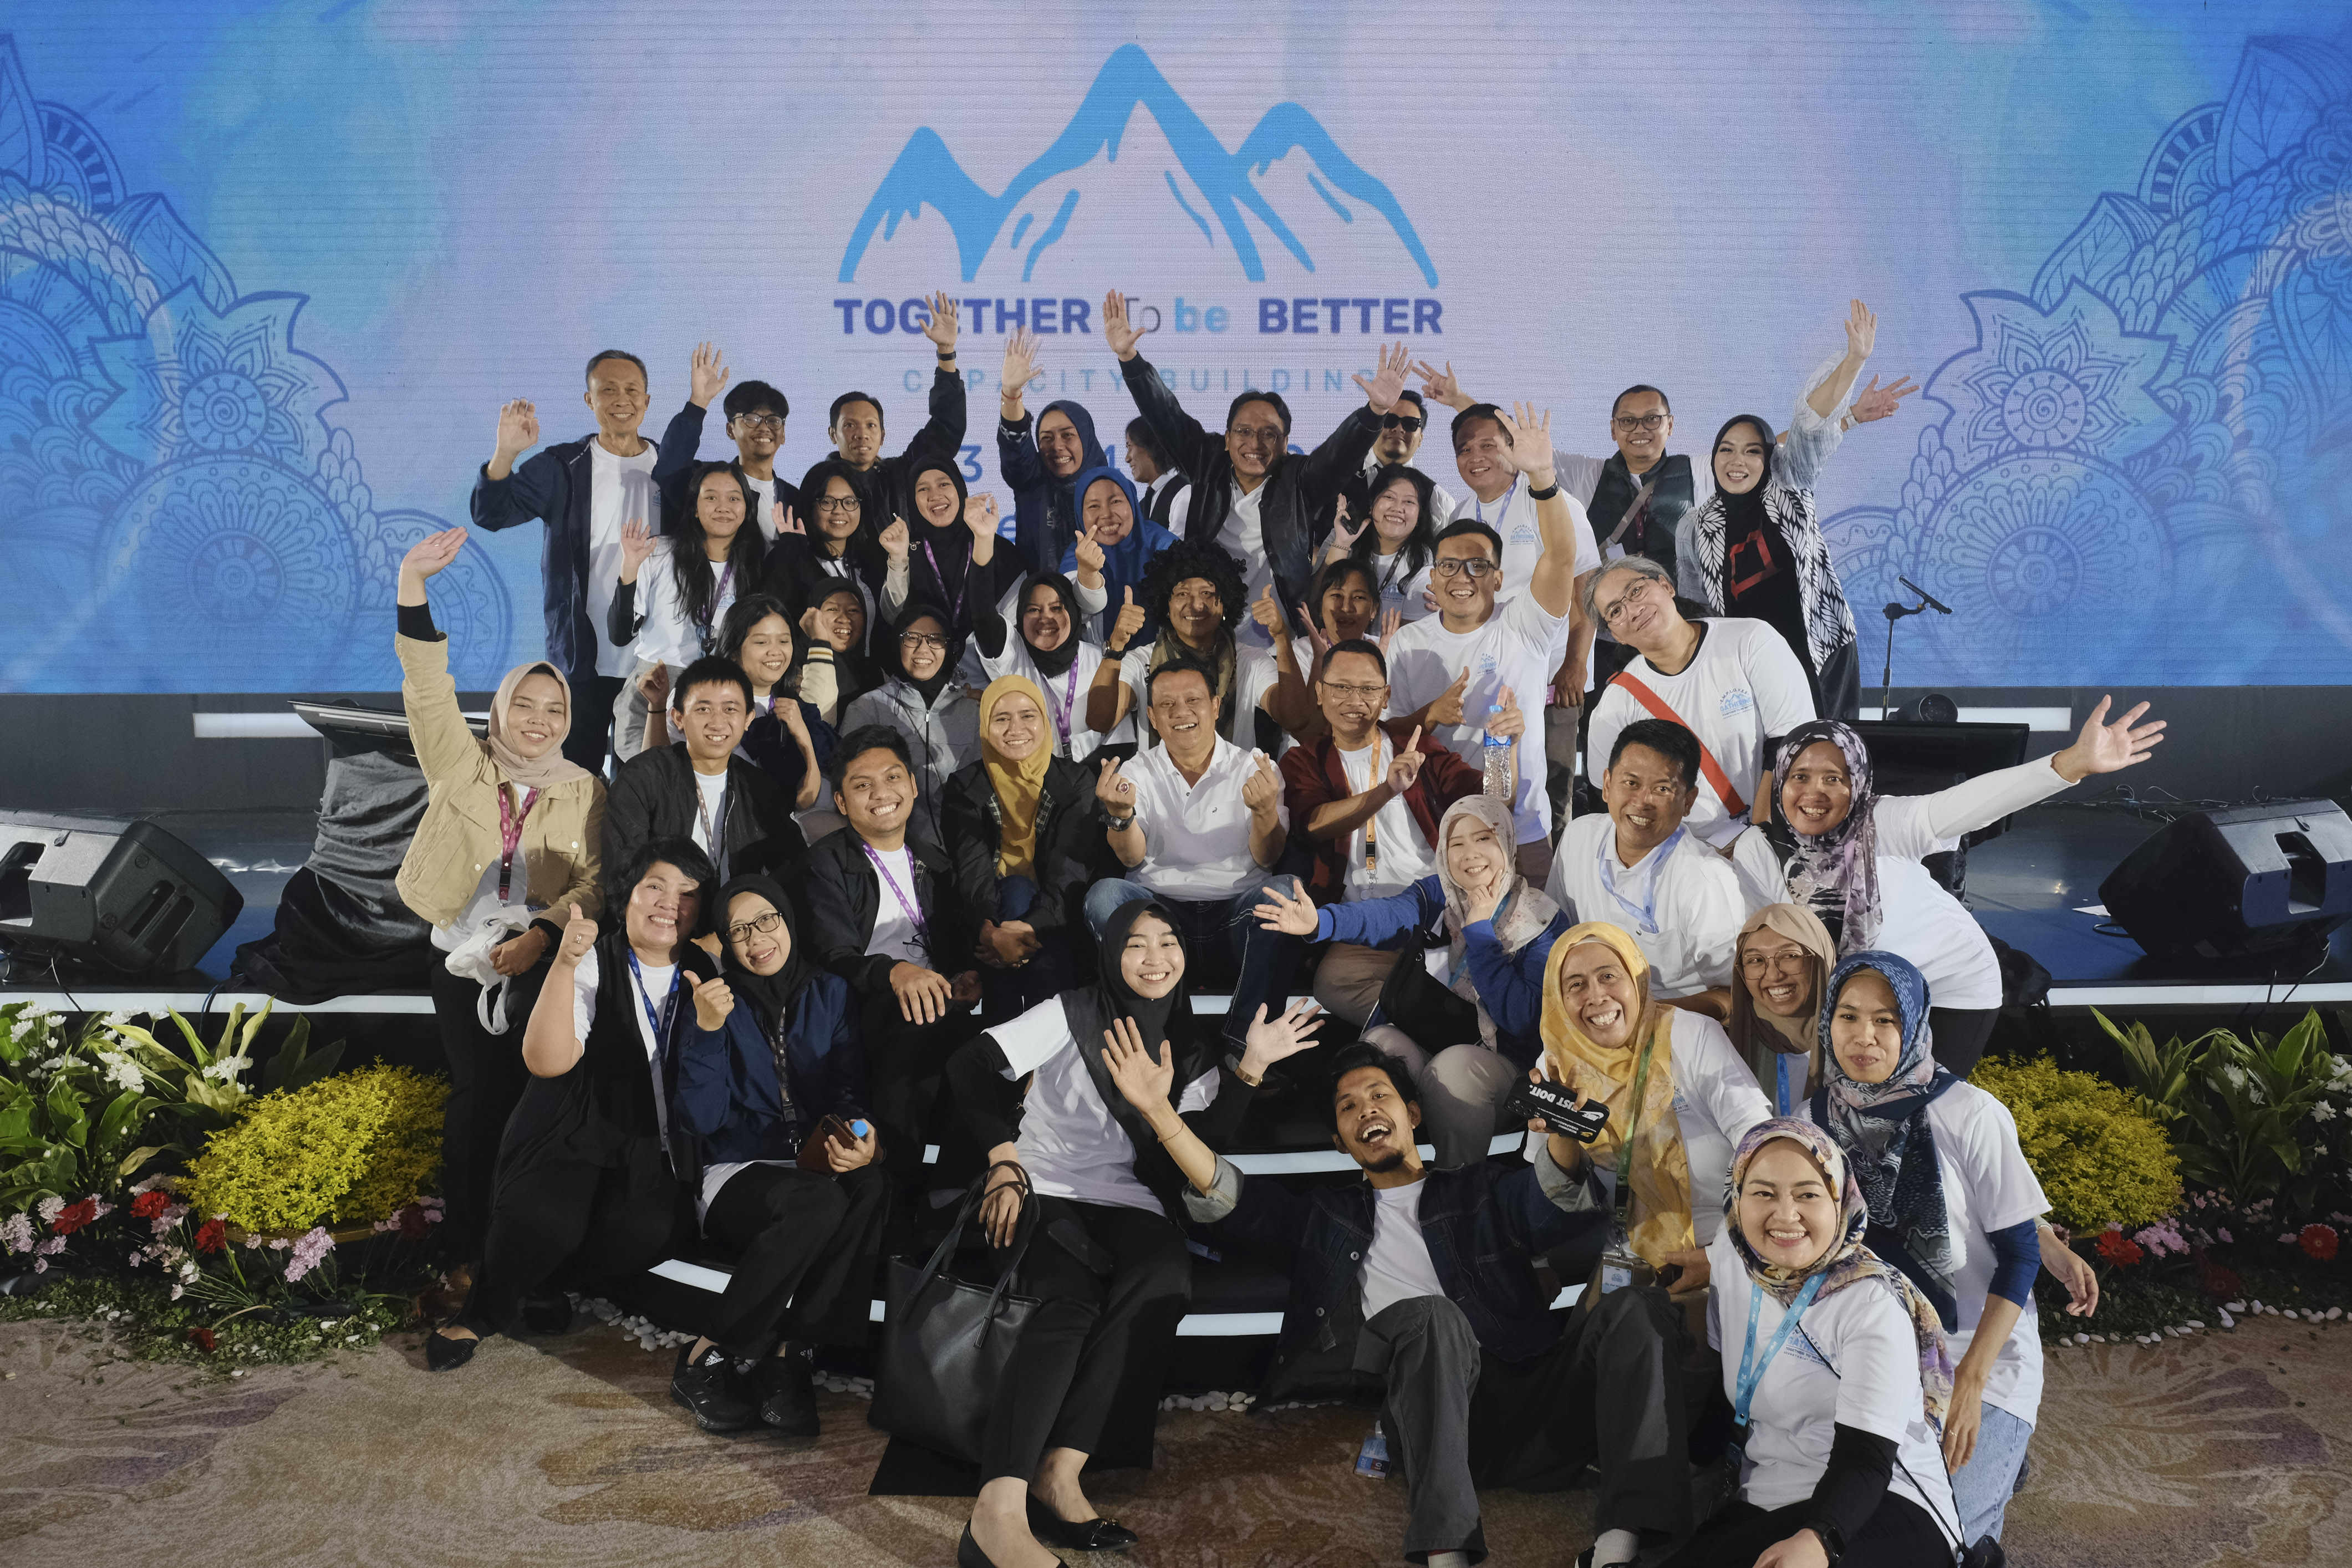 Capacity Building Lingkup Sekretariat Jenderal, Together To Be Better!